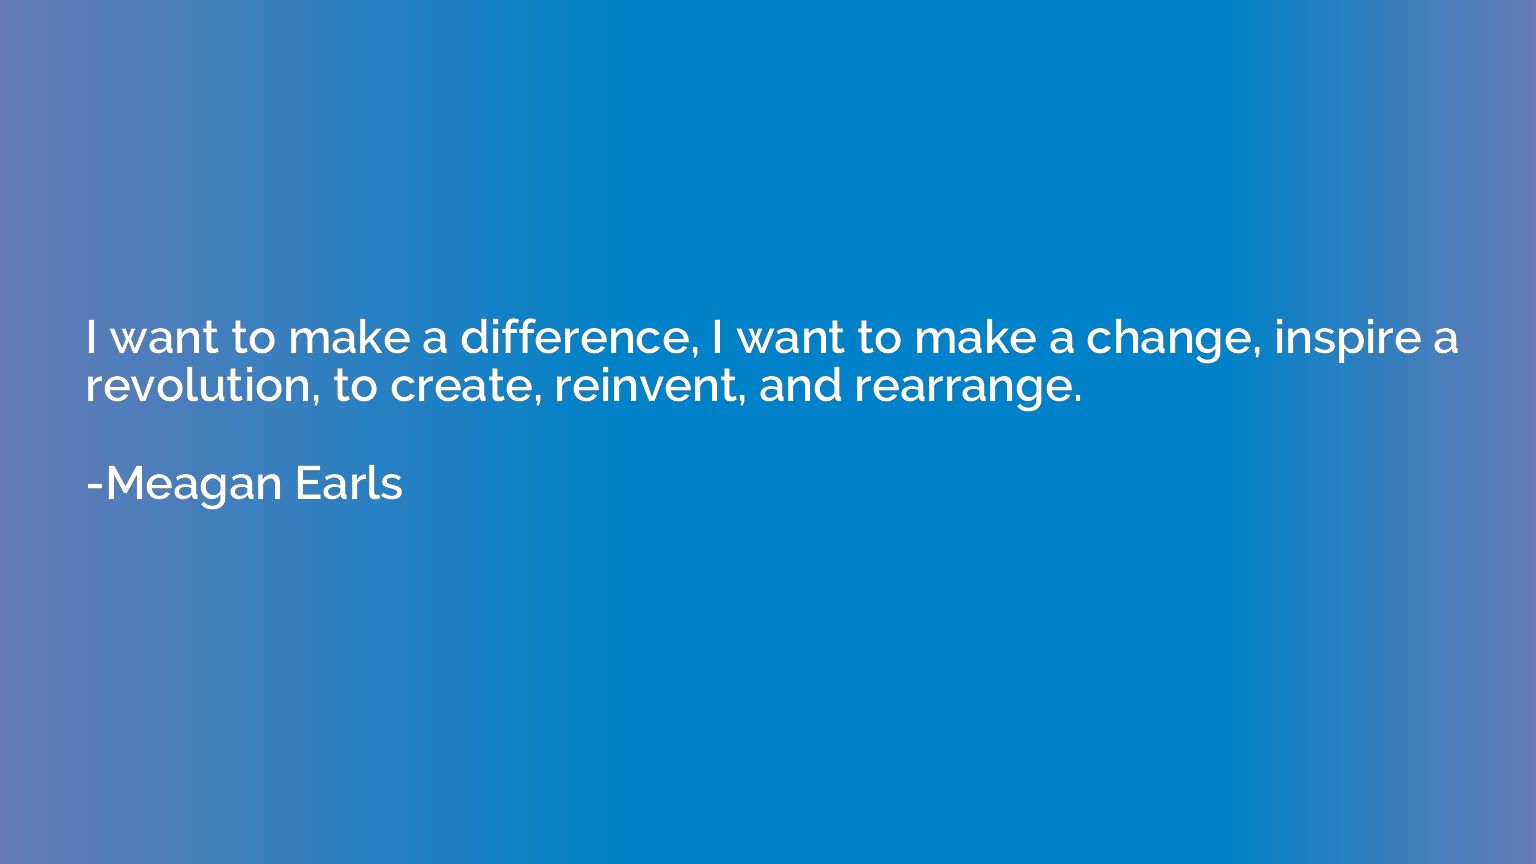 I want to make a difference, I want to make a change, inspir